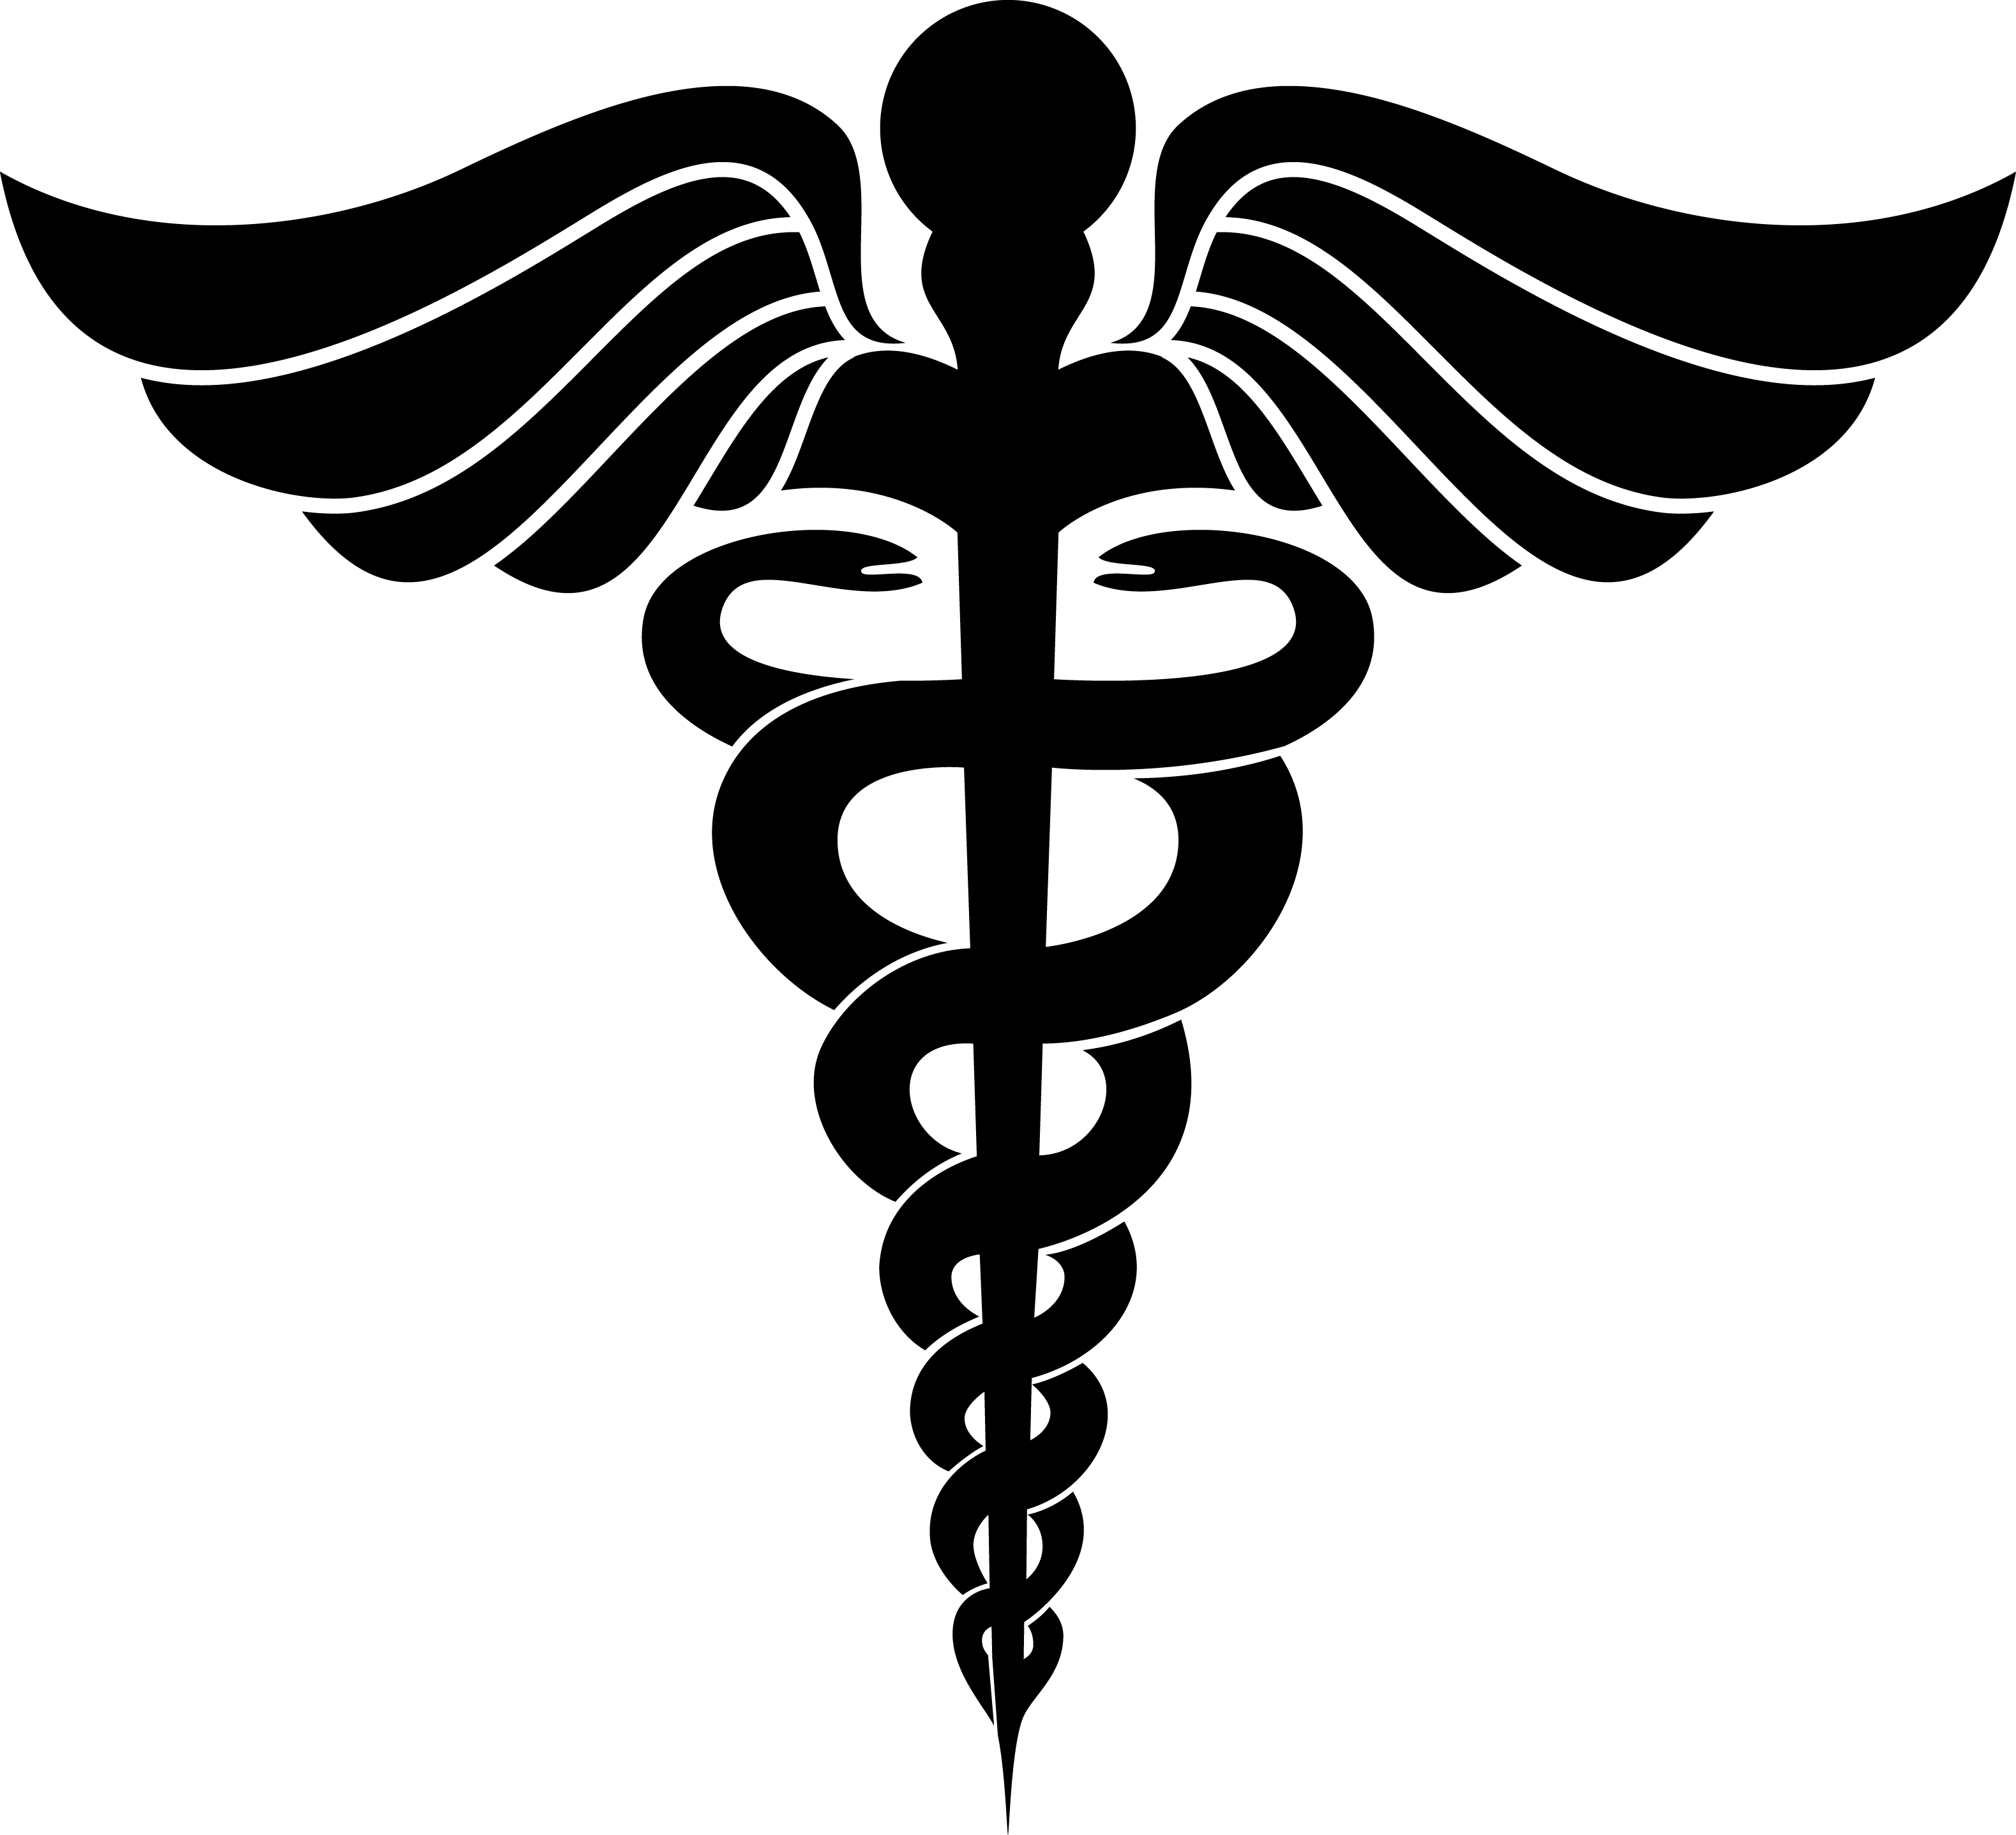 Free doctor symbol cliparts. Doctors clipart character